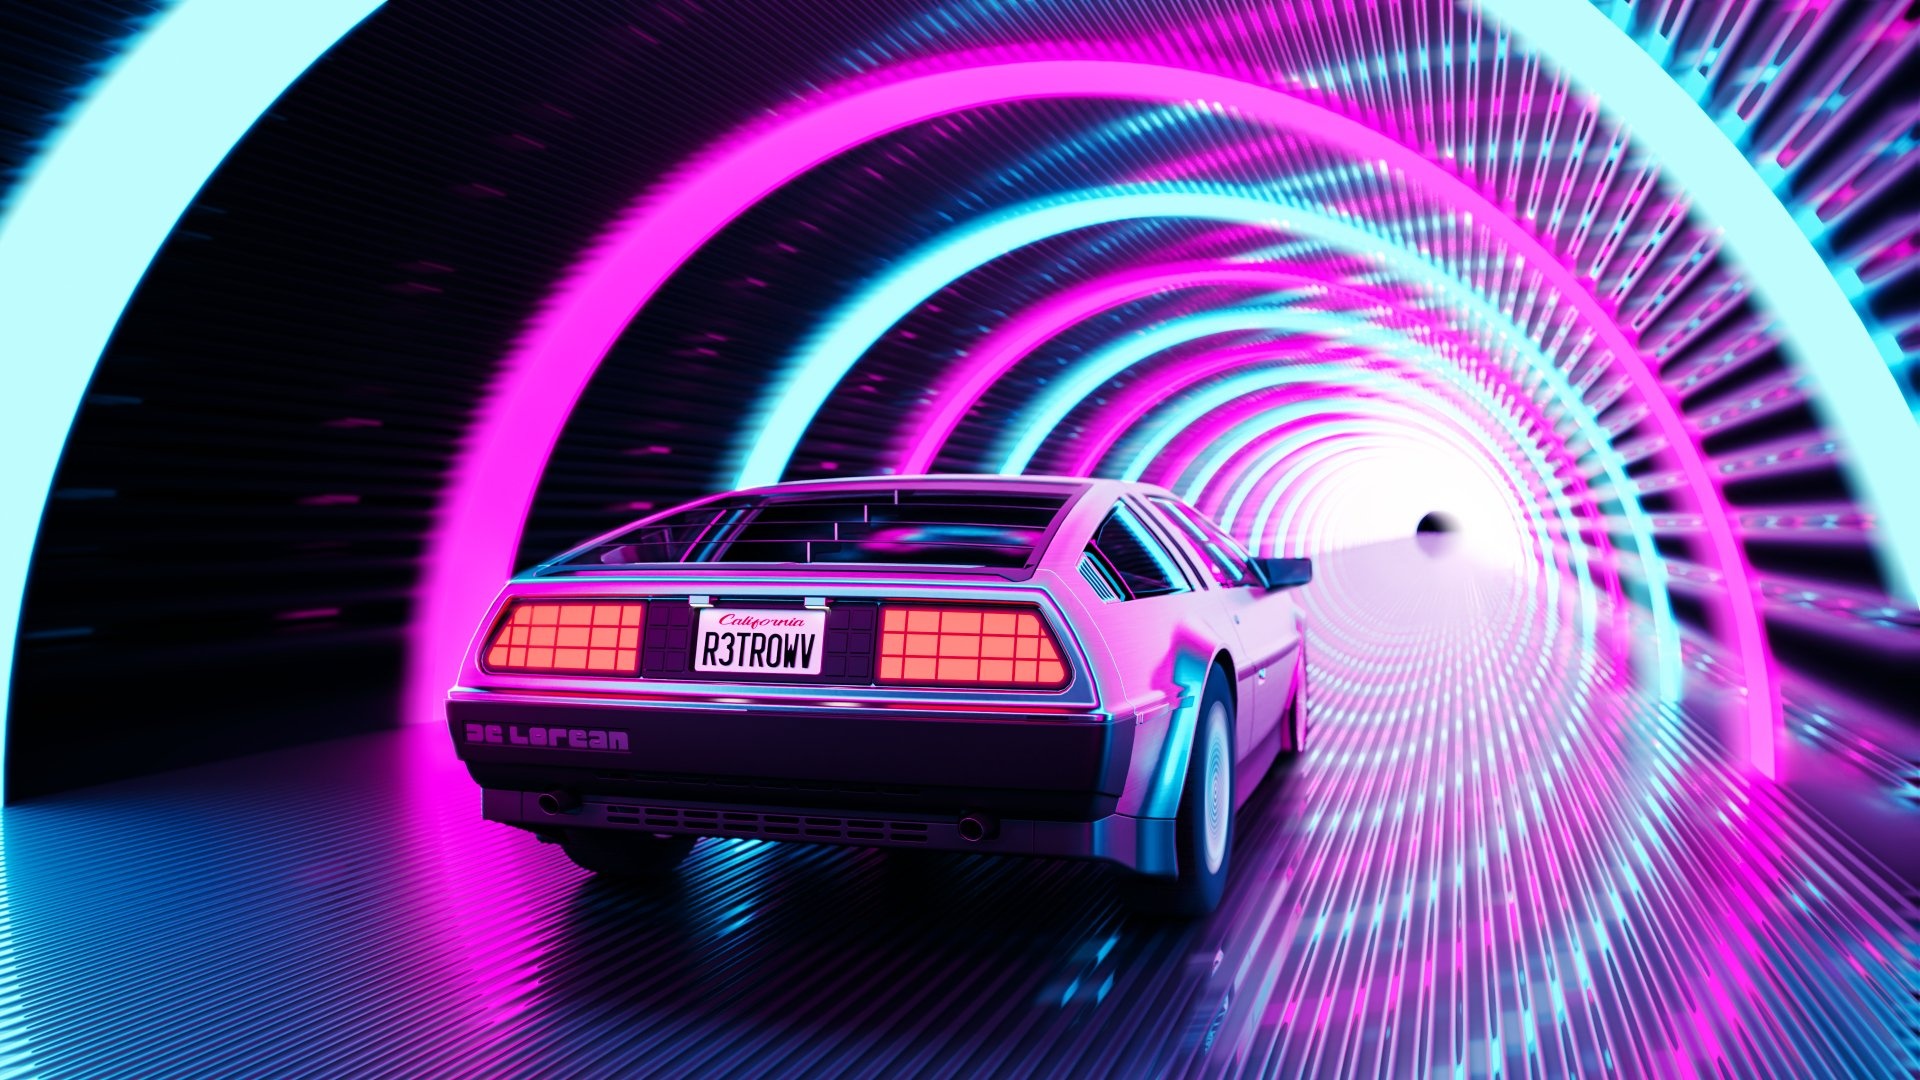 Delorean DMC 12, Back to the Future, HD wallpapers, Background images, 1920x1080 Full HD Desktop